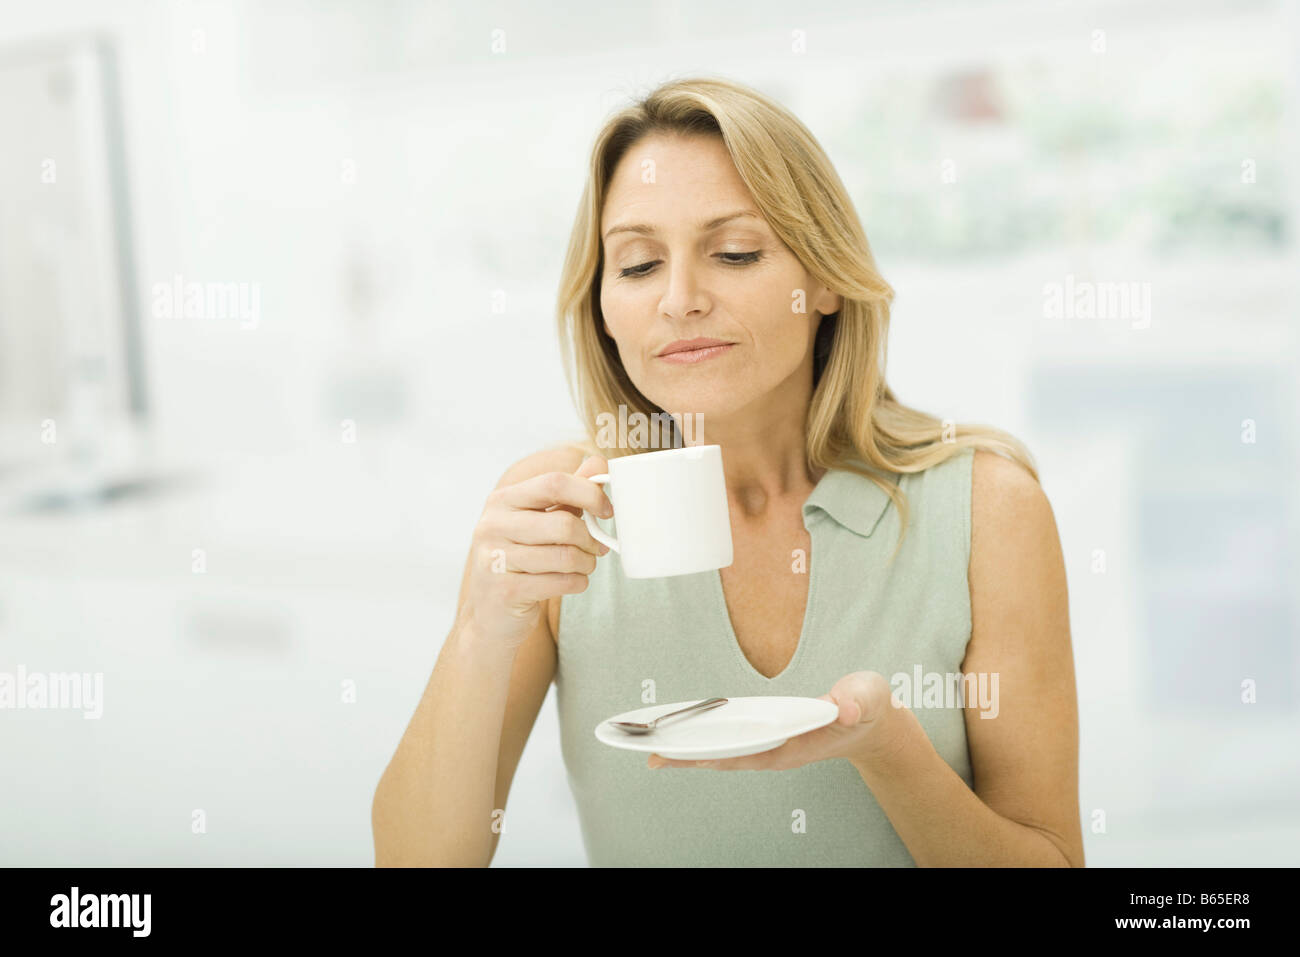 Woman holding coffee cup, smiling Stock Photo